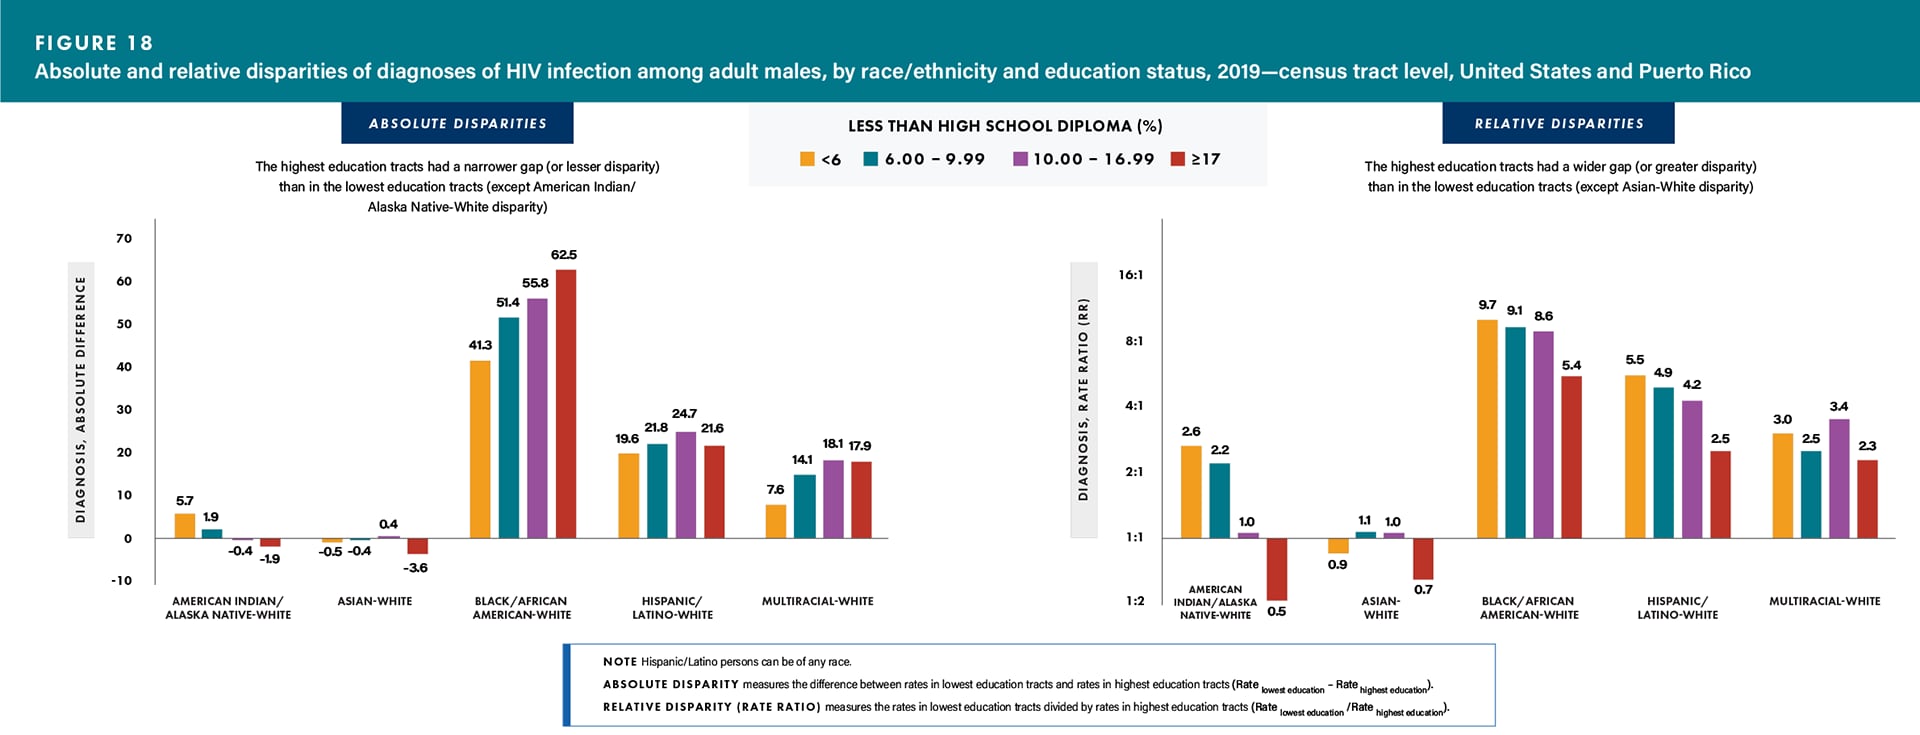 For absolute disparities, the highest education tracts had a narrower gap (or lesser disparity) than in the lowest education tracts (except American Indian/Alaskan Native-White disparity). For relative disparities, the highest education tracts had a wider gap (or greater disparity) than in the lowest education tracts (except Asian-White disparity).